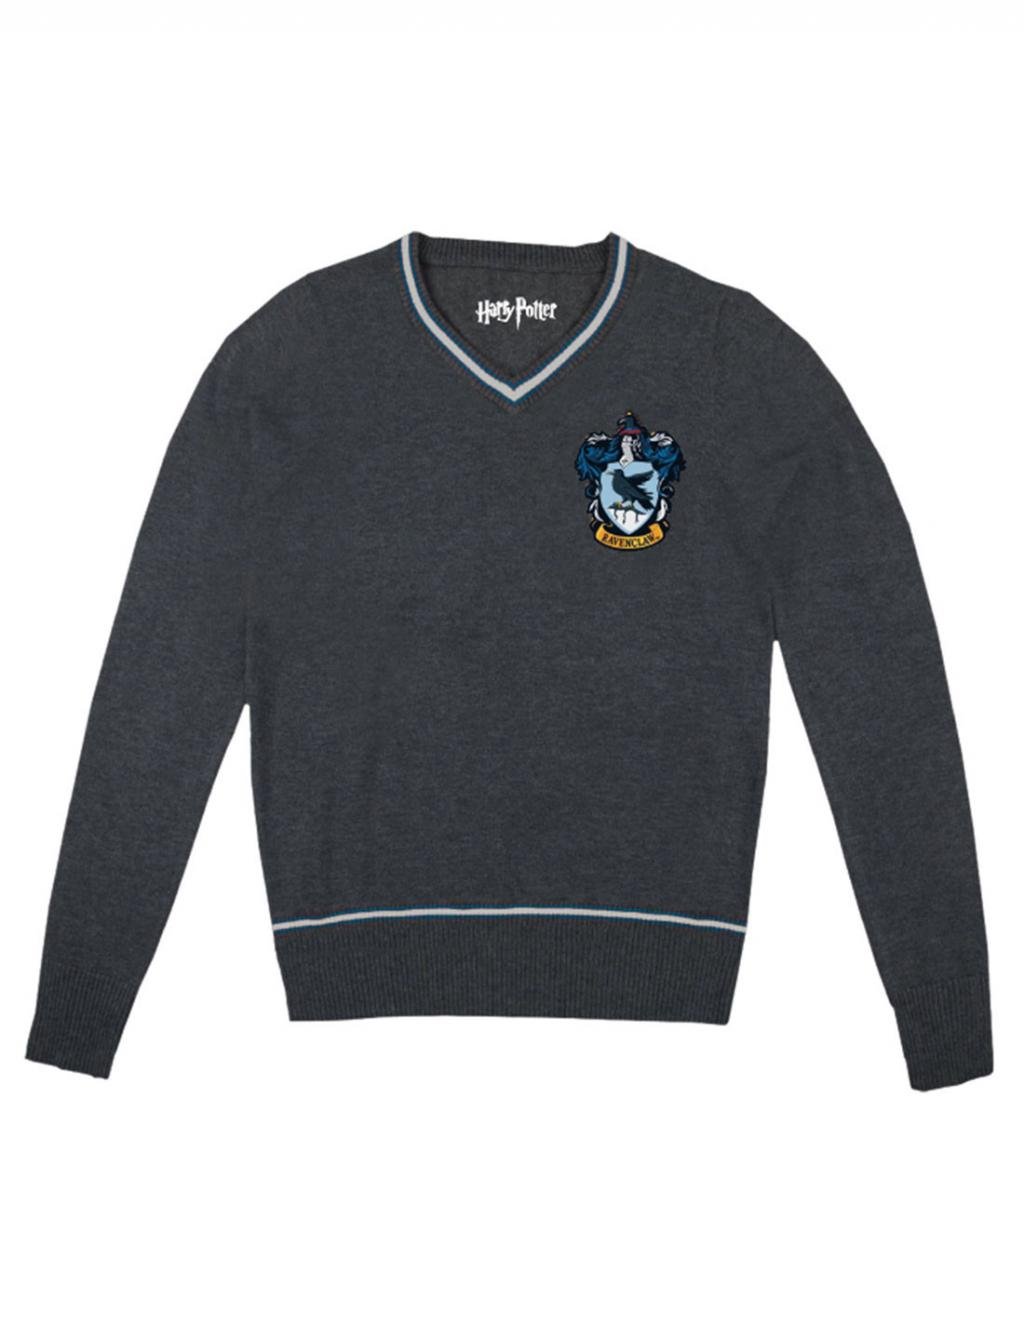 HARRY POTTER - Pull-Over - Ravenclaw Class (XXS)